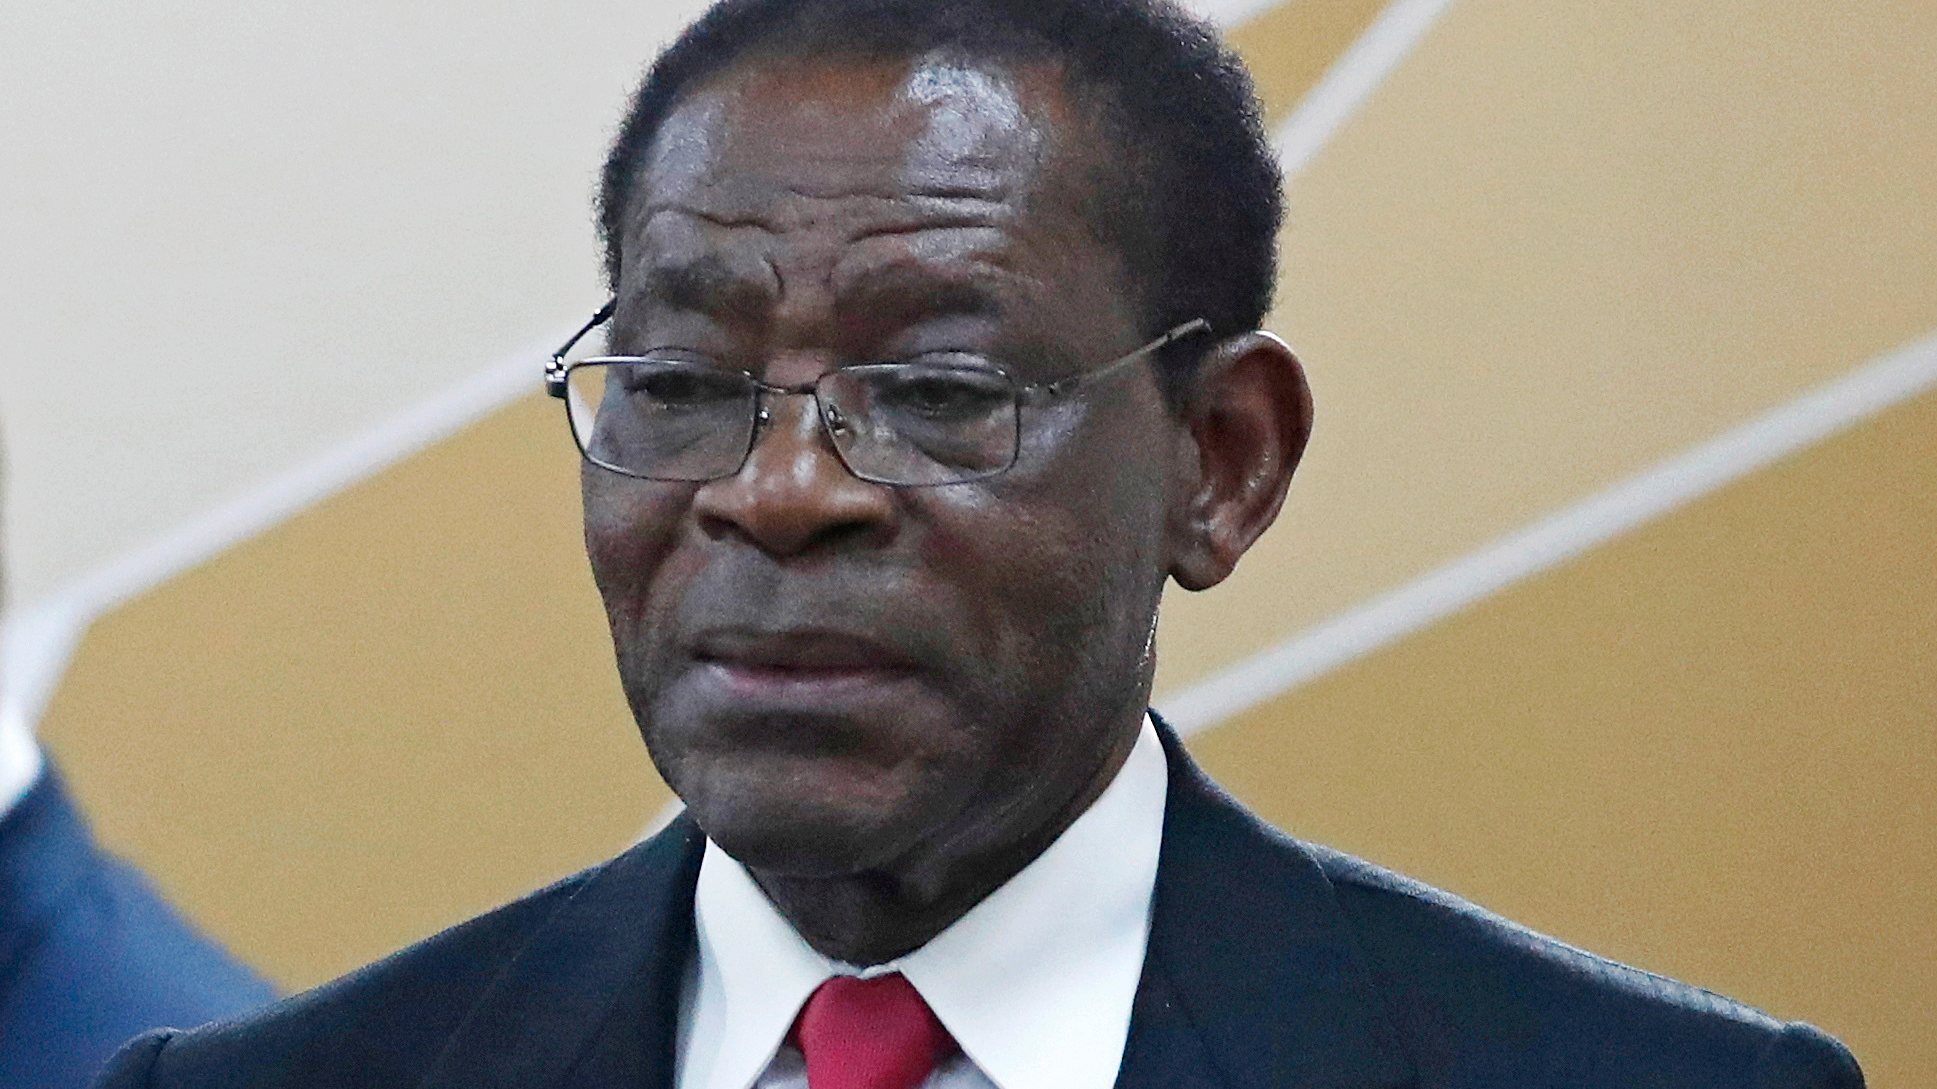 epa09061237 (FILE) - President of Equatorial Guinea Teodoro Obiang Nguema Mbasogo on the sidelines of the Russia-Africa Summit in the Black sea resort of Sochi, Russia, 24 October 2019 (reissued 08 March 2021). Equatorial Guinea&#039;s main city Bata has been rocked by several explosions on 07 March, President Teodoro Obiang Nguema Mbasogo said in an official statement, blaming negligence and carelessness of a unit in charge of explosives at a military base.  EPA/SERGEI CHIRIKOV *** Local Caption *** 54161279